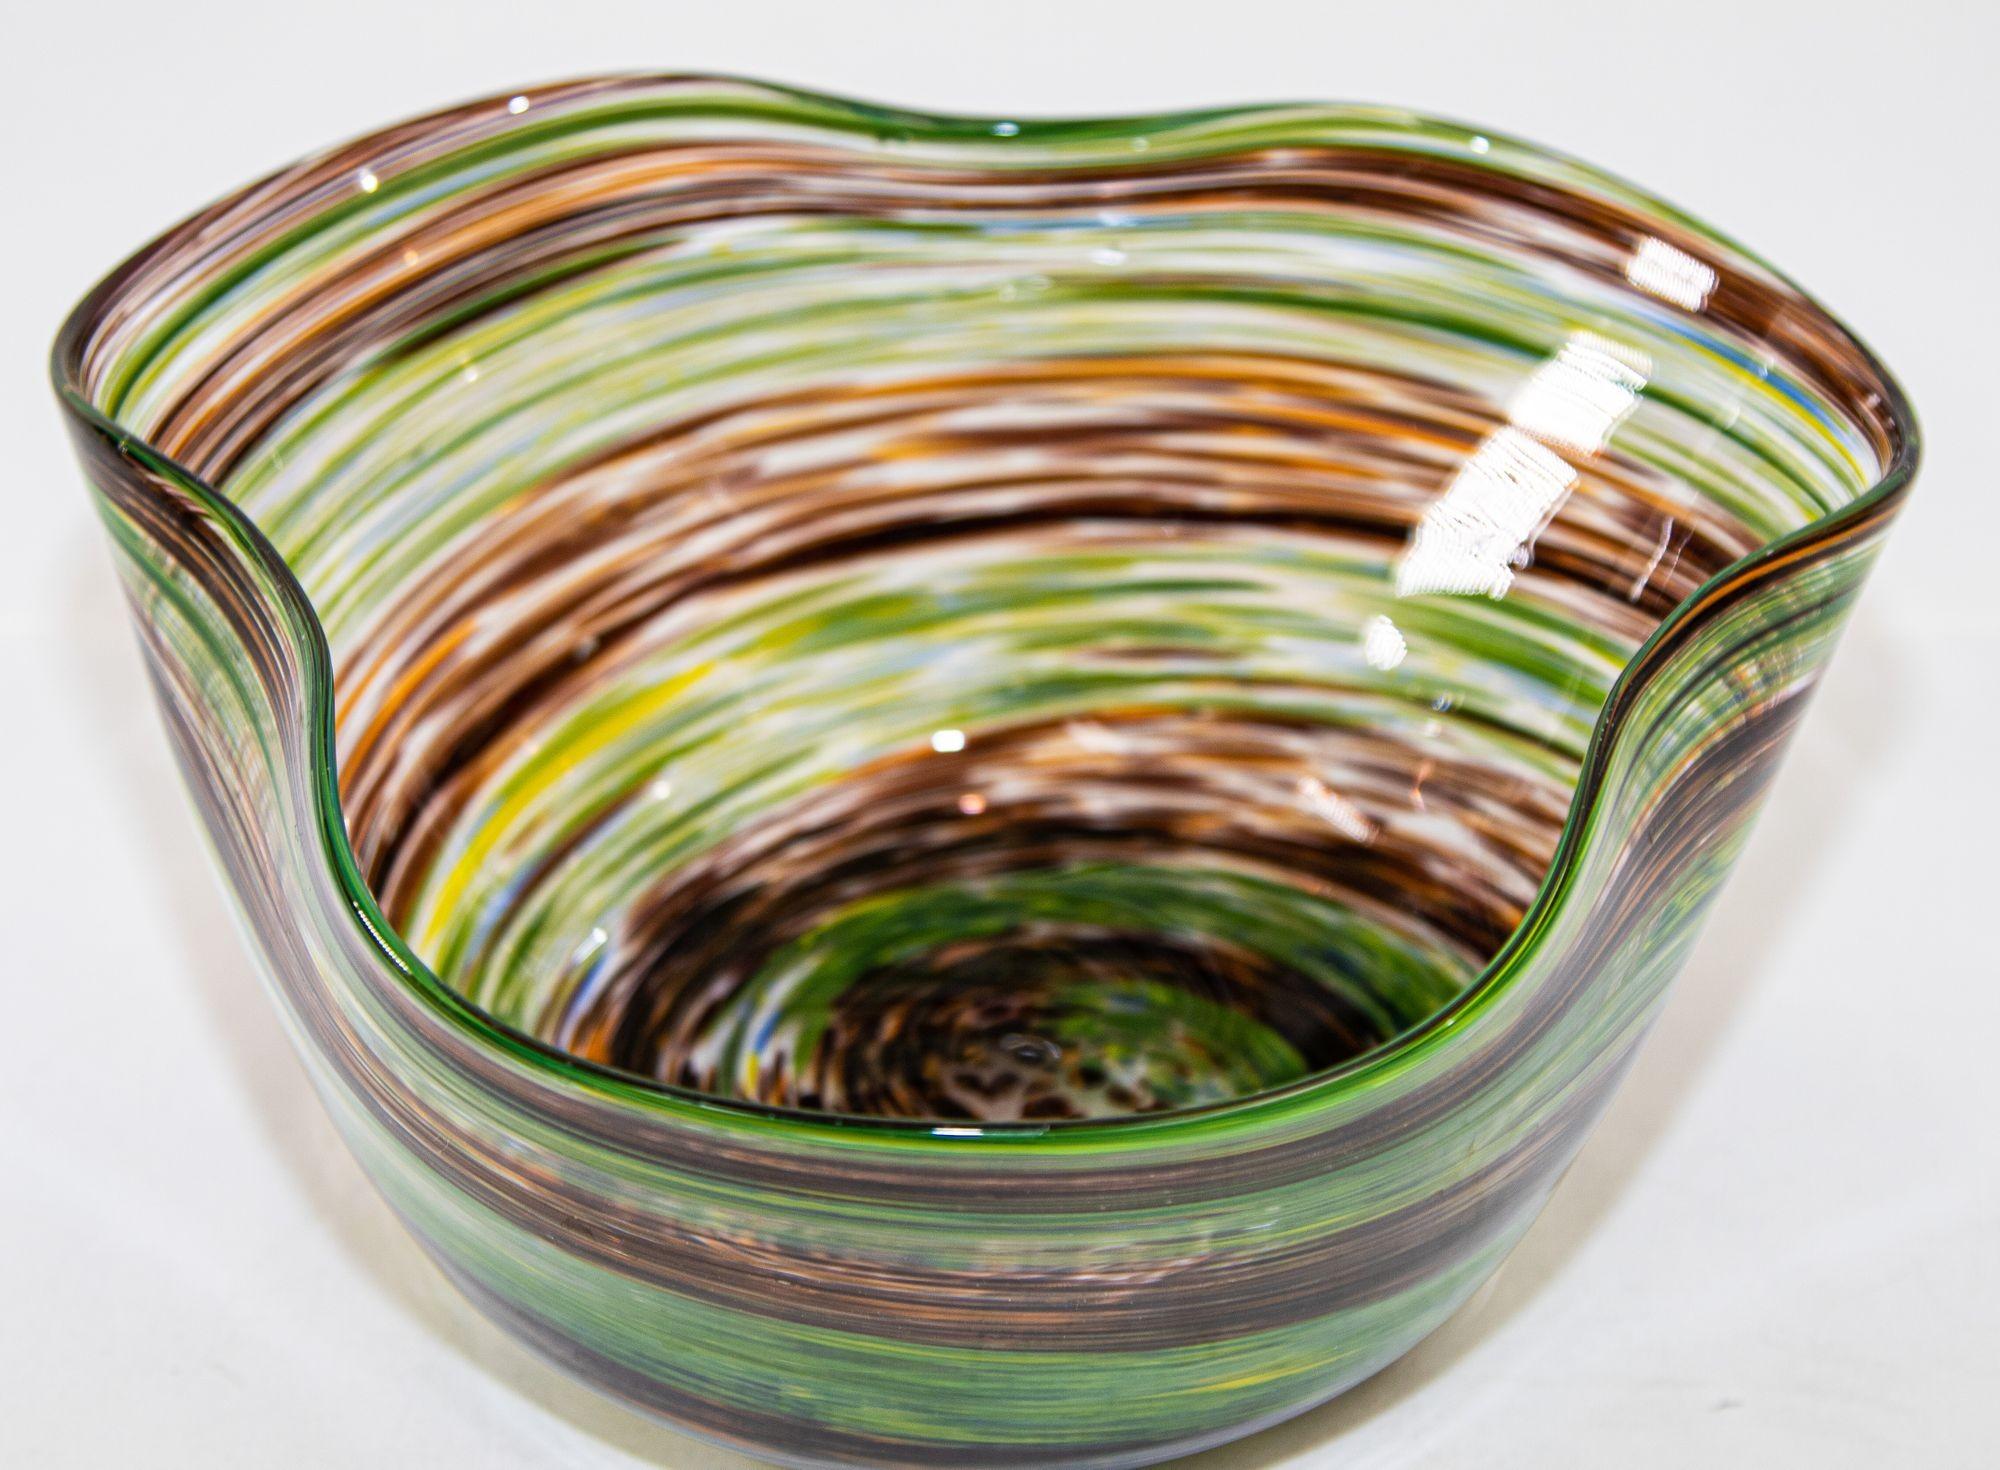 Hand-Crafted Murano Art Glass Decorative Vintage Bowl